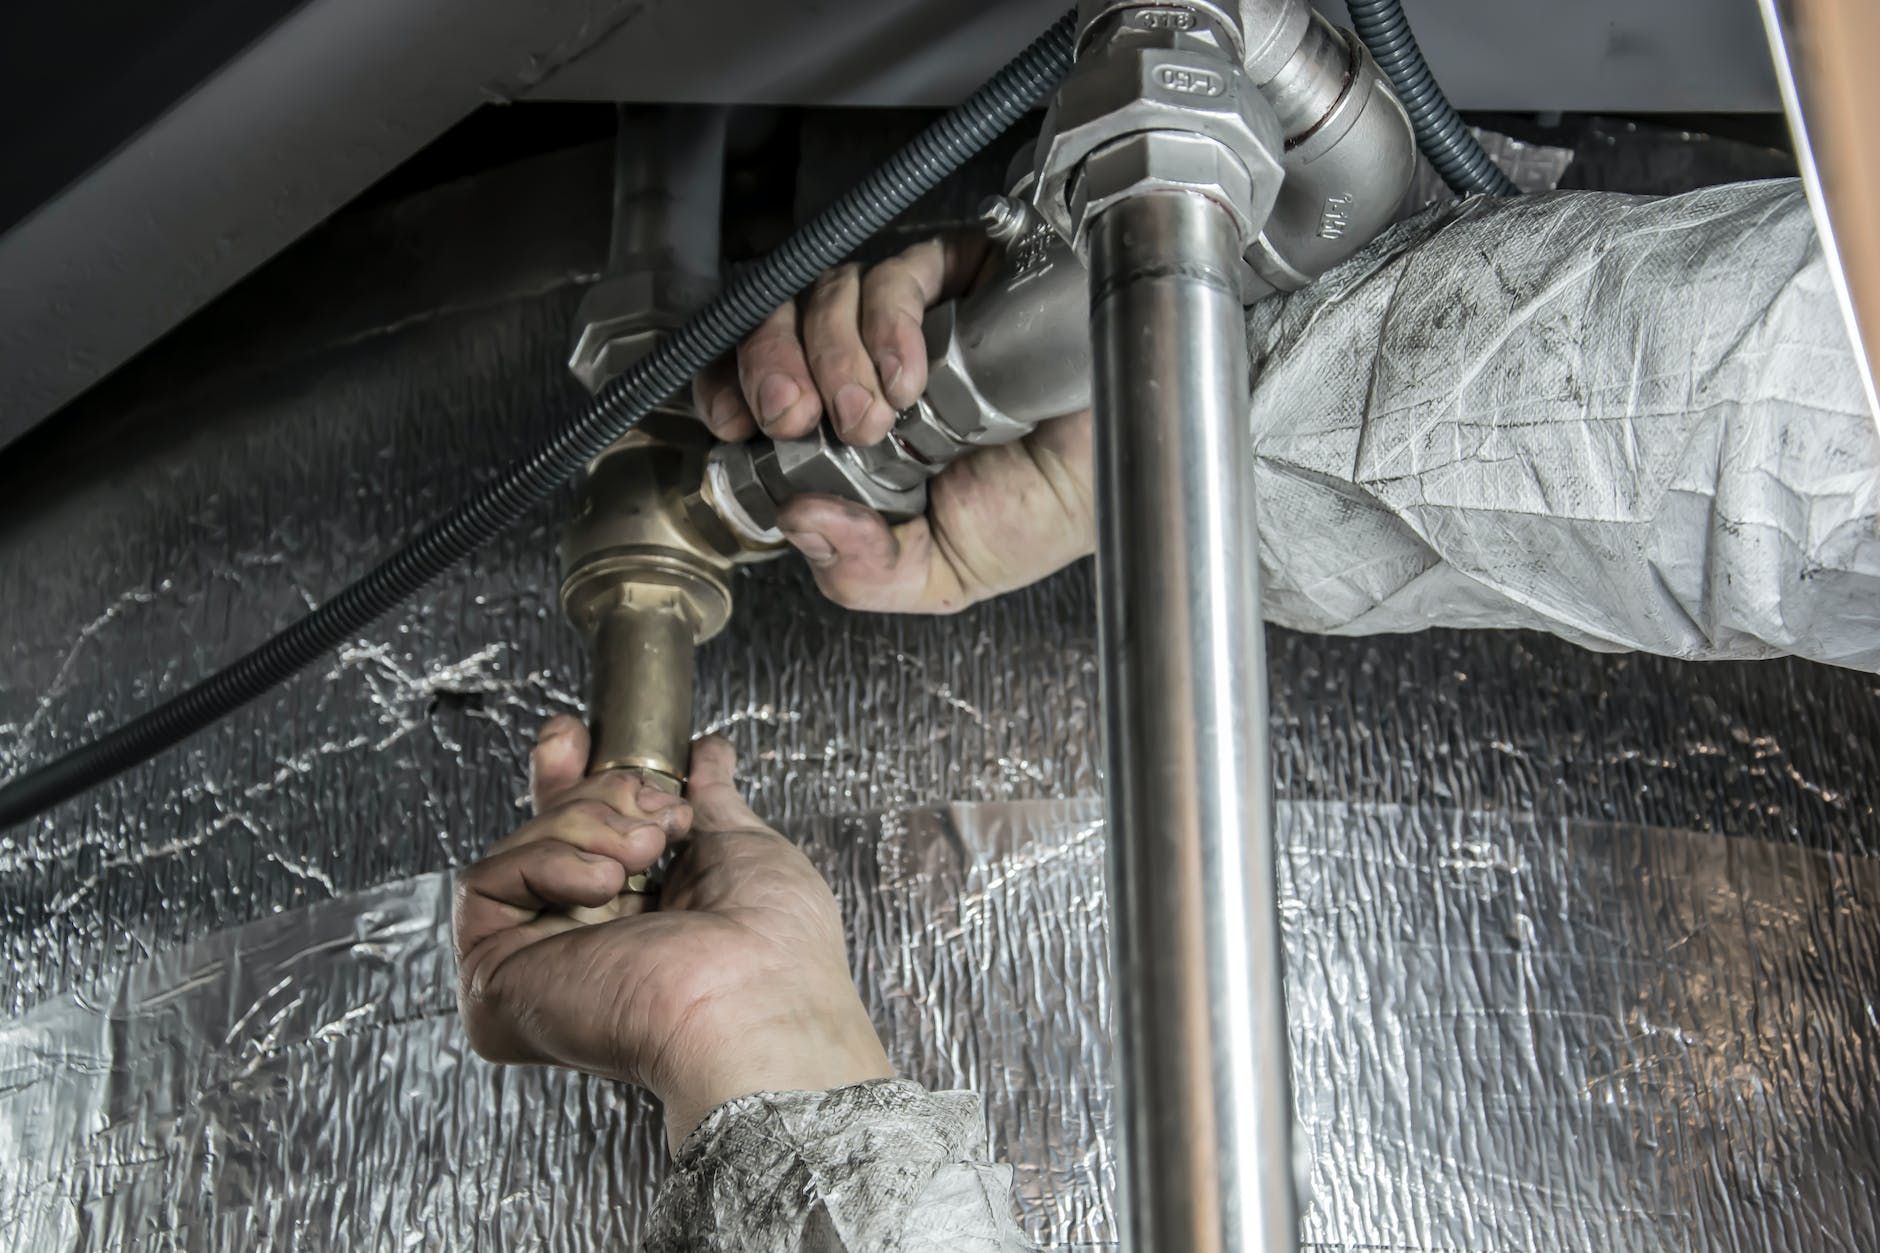 TURBO HOME SERVICES DELIVERS TURBO PLUMBING REPIPING SERVICES IN HOUSTON